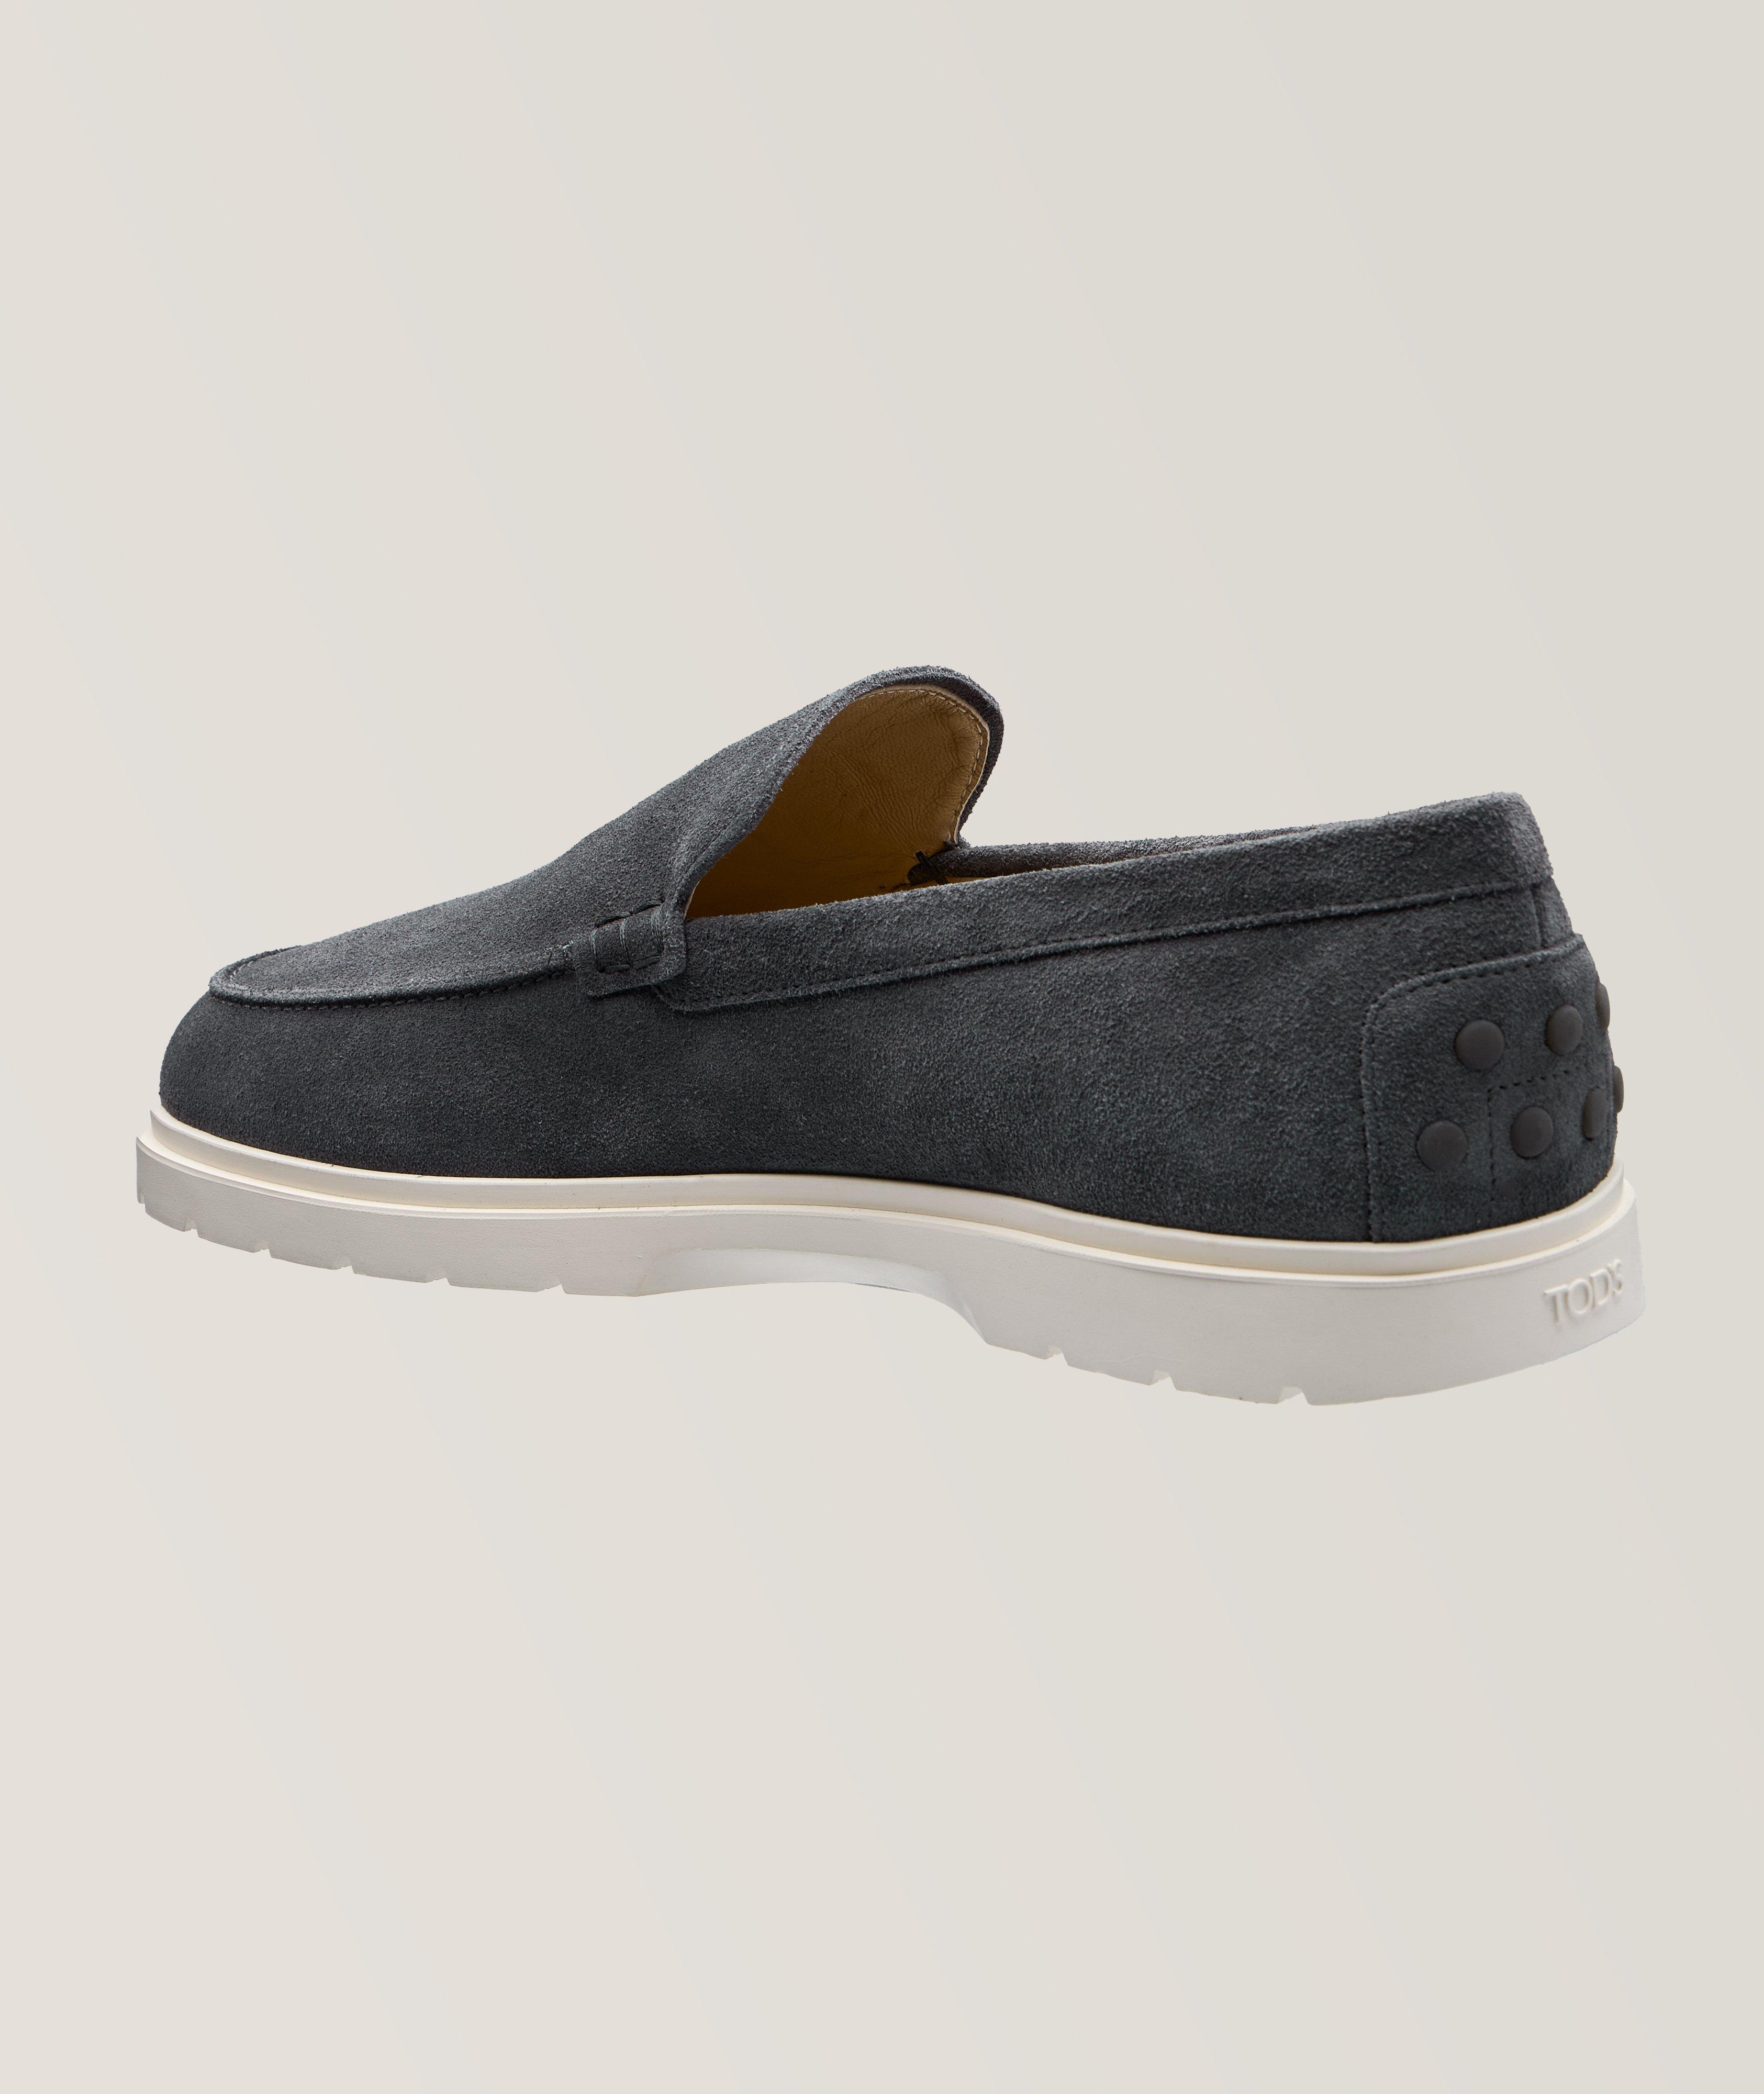 Suede Slipper Loafers image 1